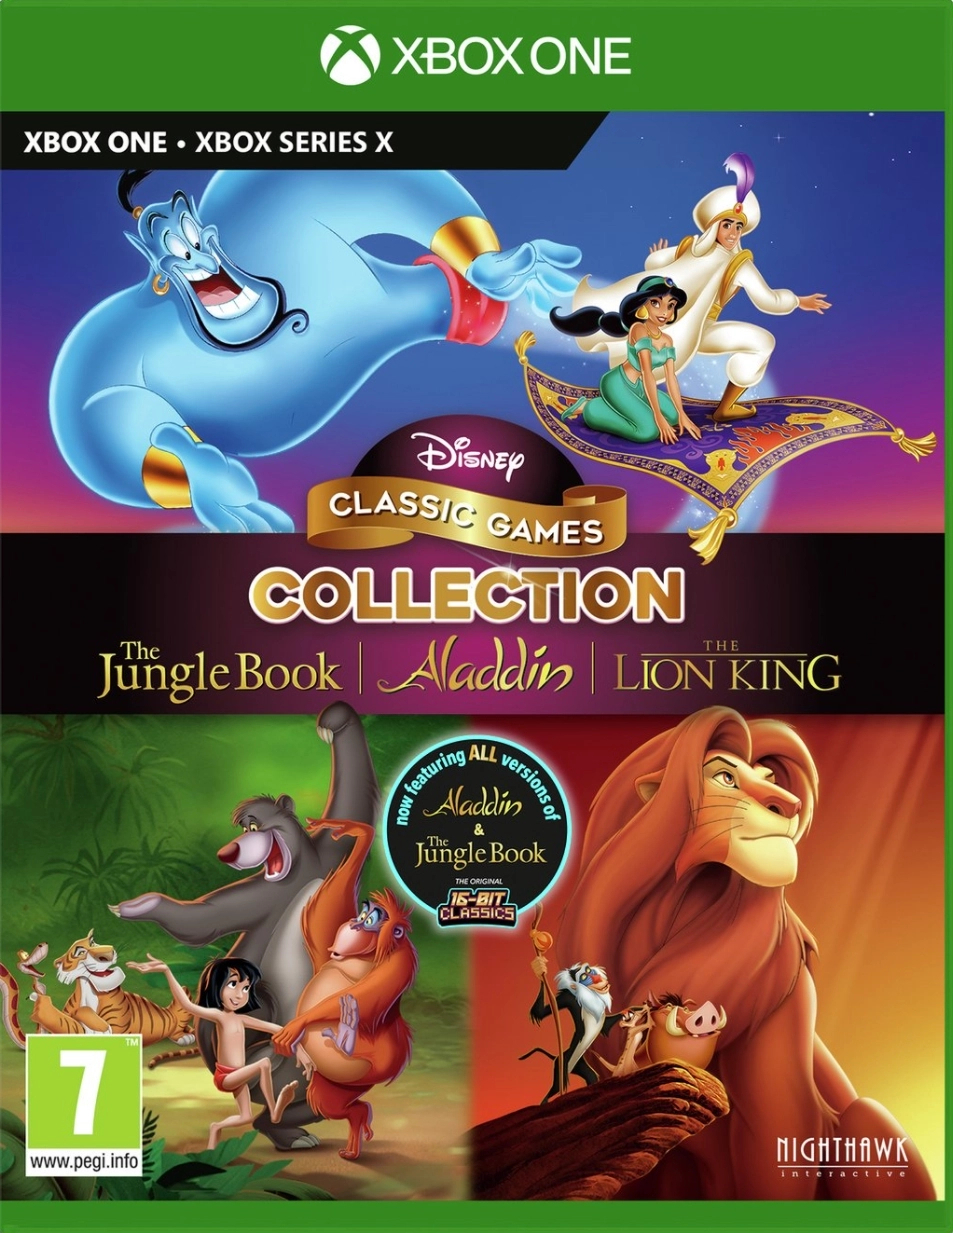 Nighthawk Disney Classic Games: The Jungle Book, Aladdin and The Lion King Xbox One